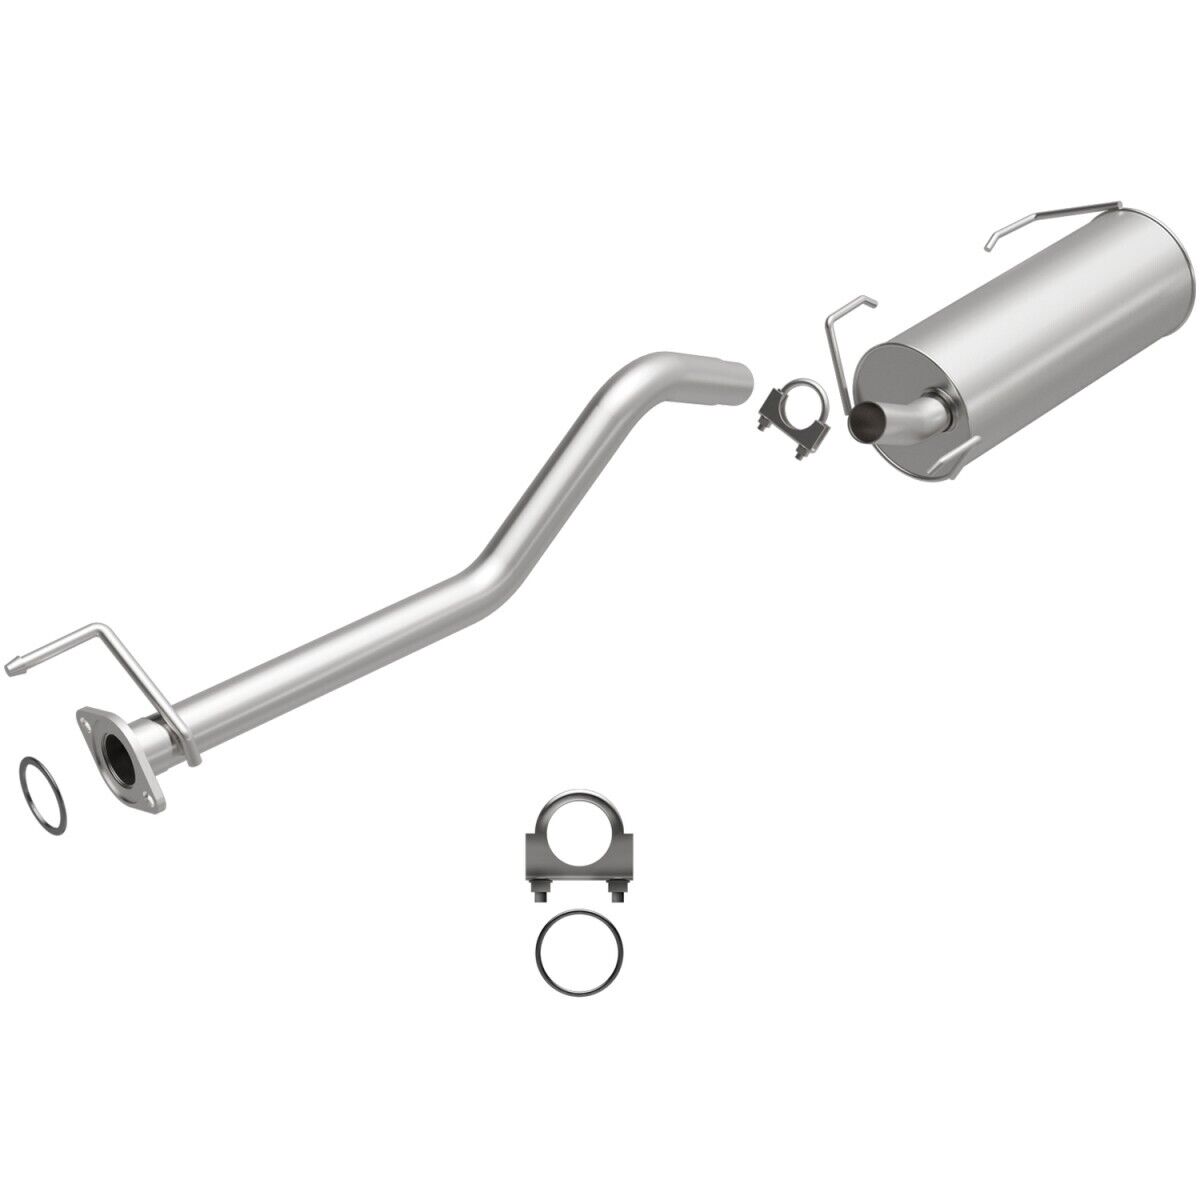 106-0324 BRExhaust Exhaust System for Toyota Previa 1991-1995